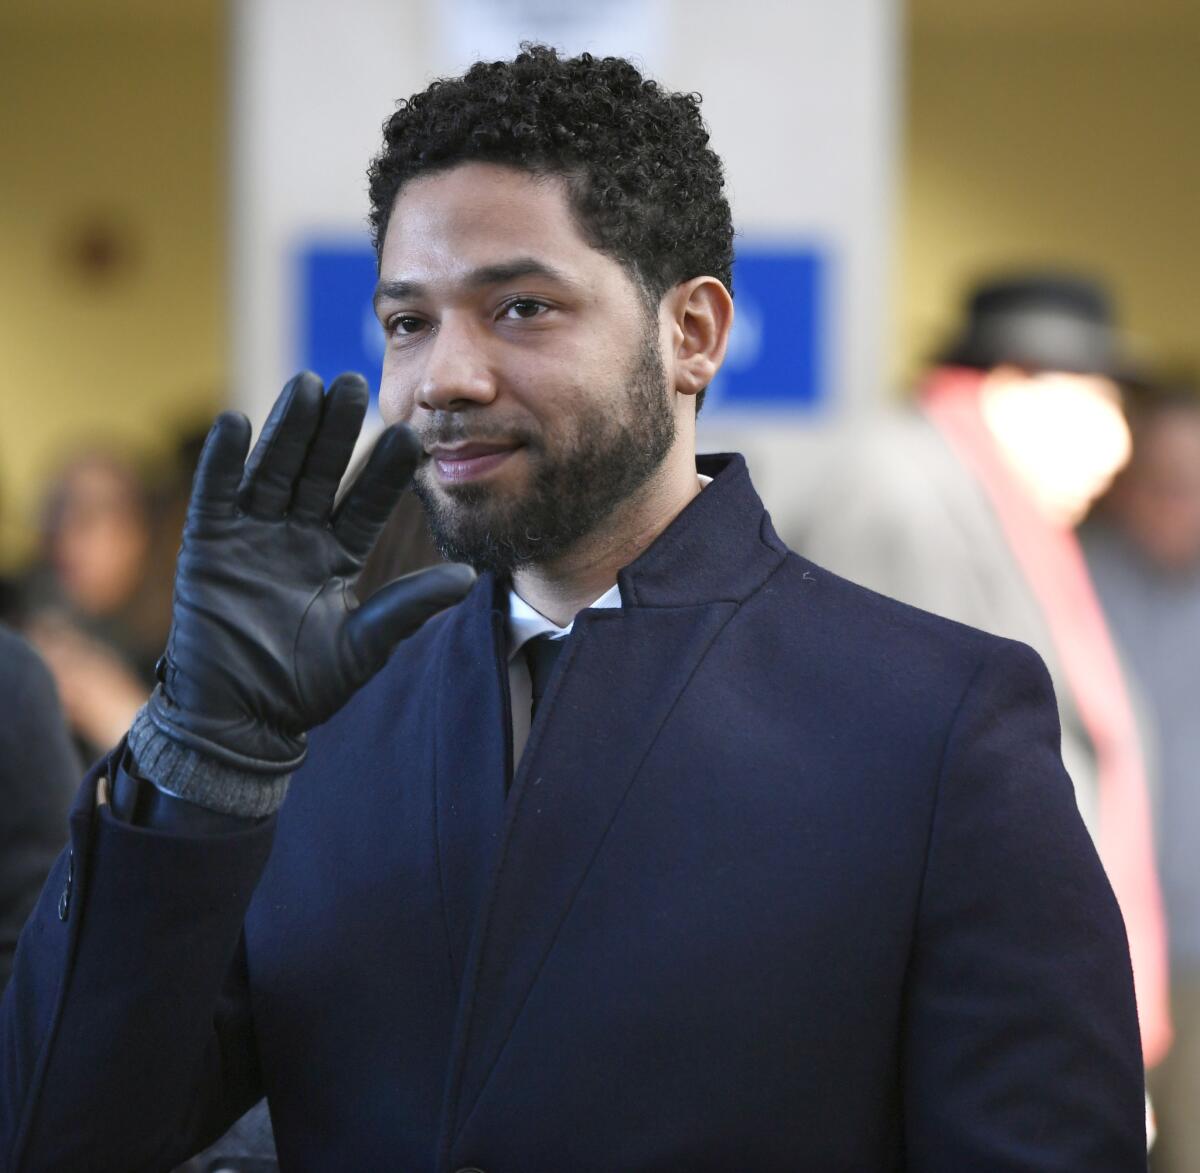 Jussie Smollett smiles and waves to supporters before leaving Cook County Court after his charges were dropped Tuesday.